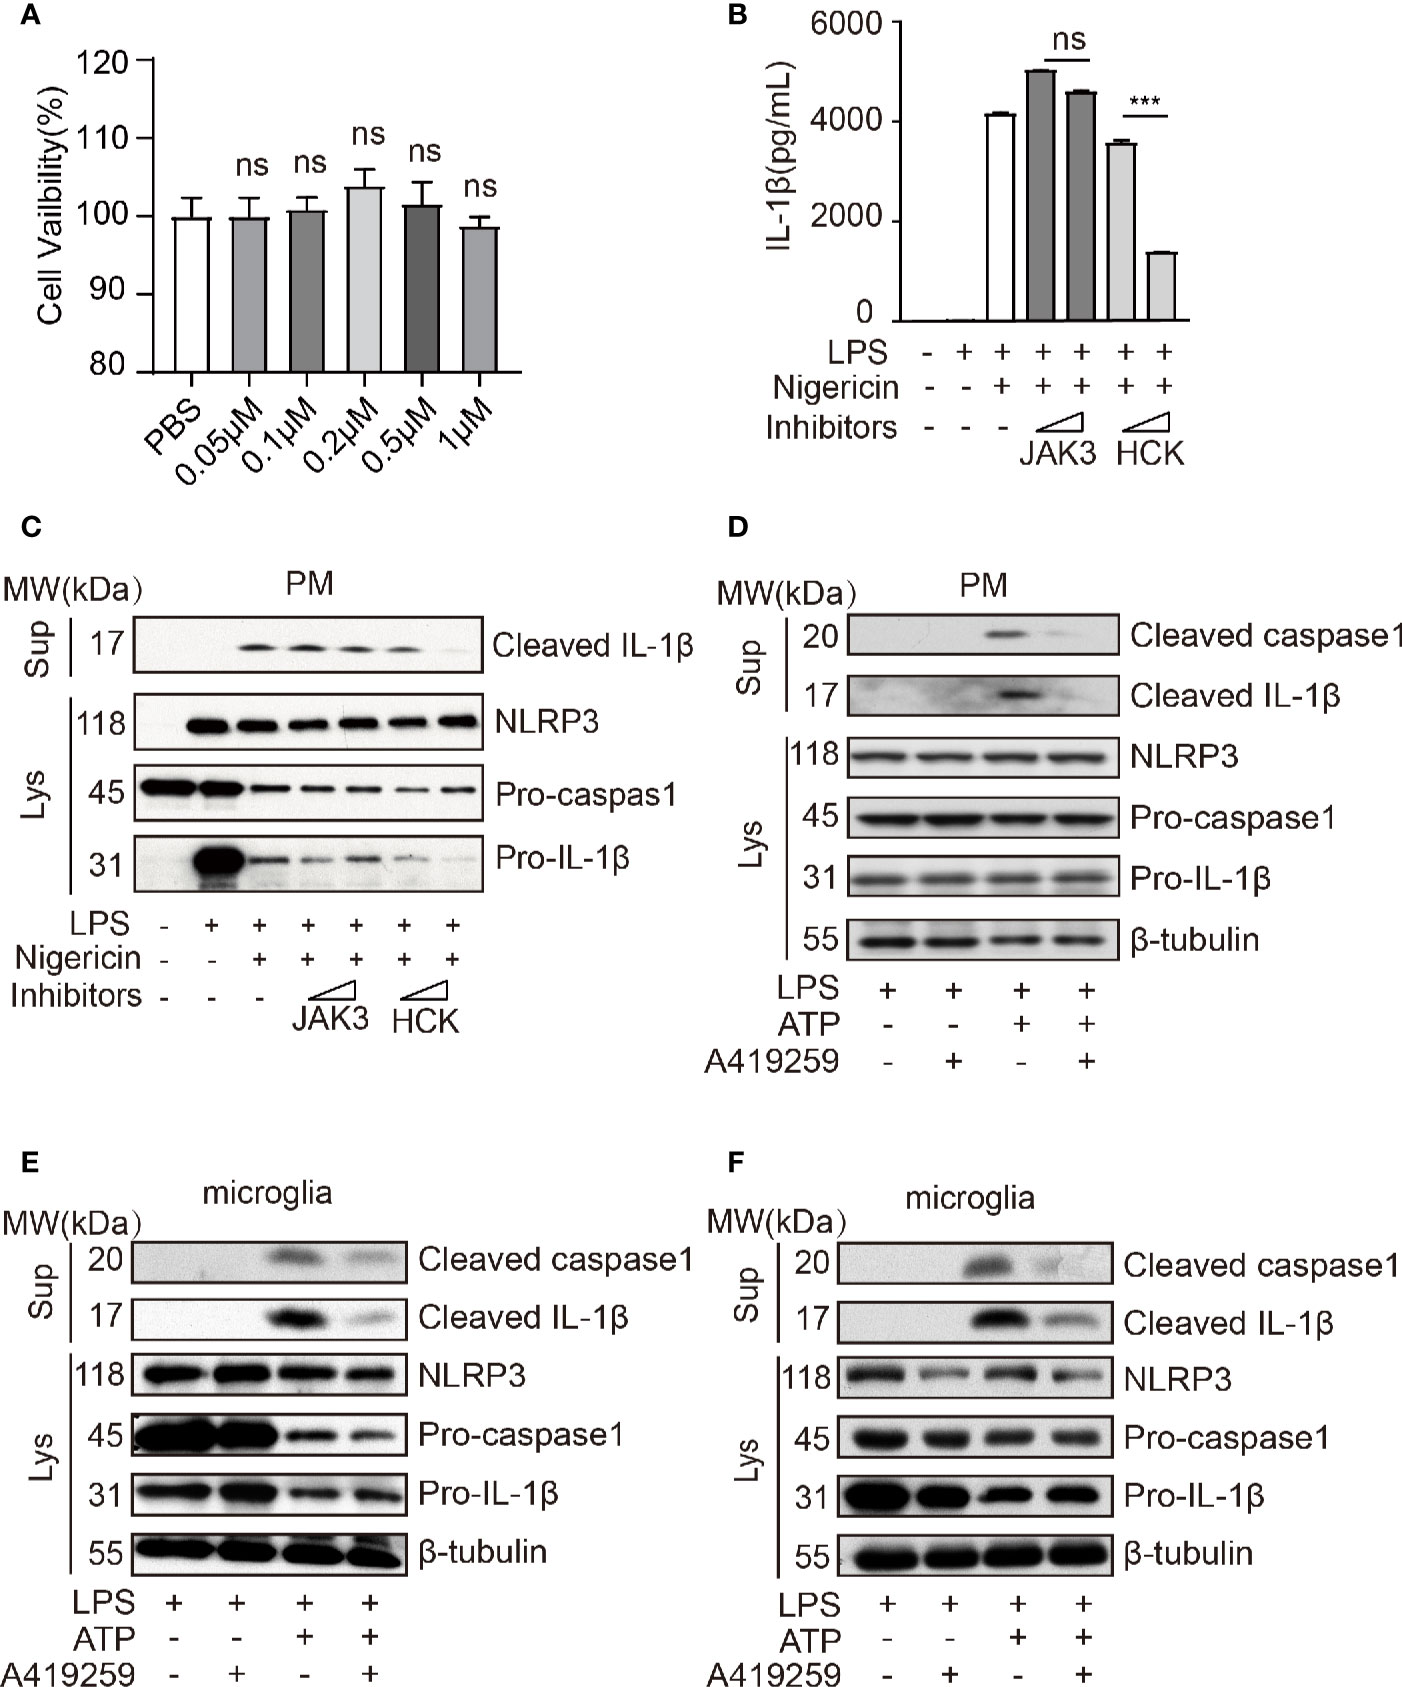 Frontiers | Hematopoietic Cell Kinase (HCK) Is Essential for NLRP3